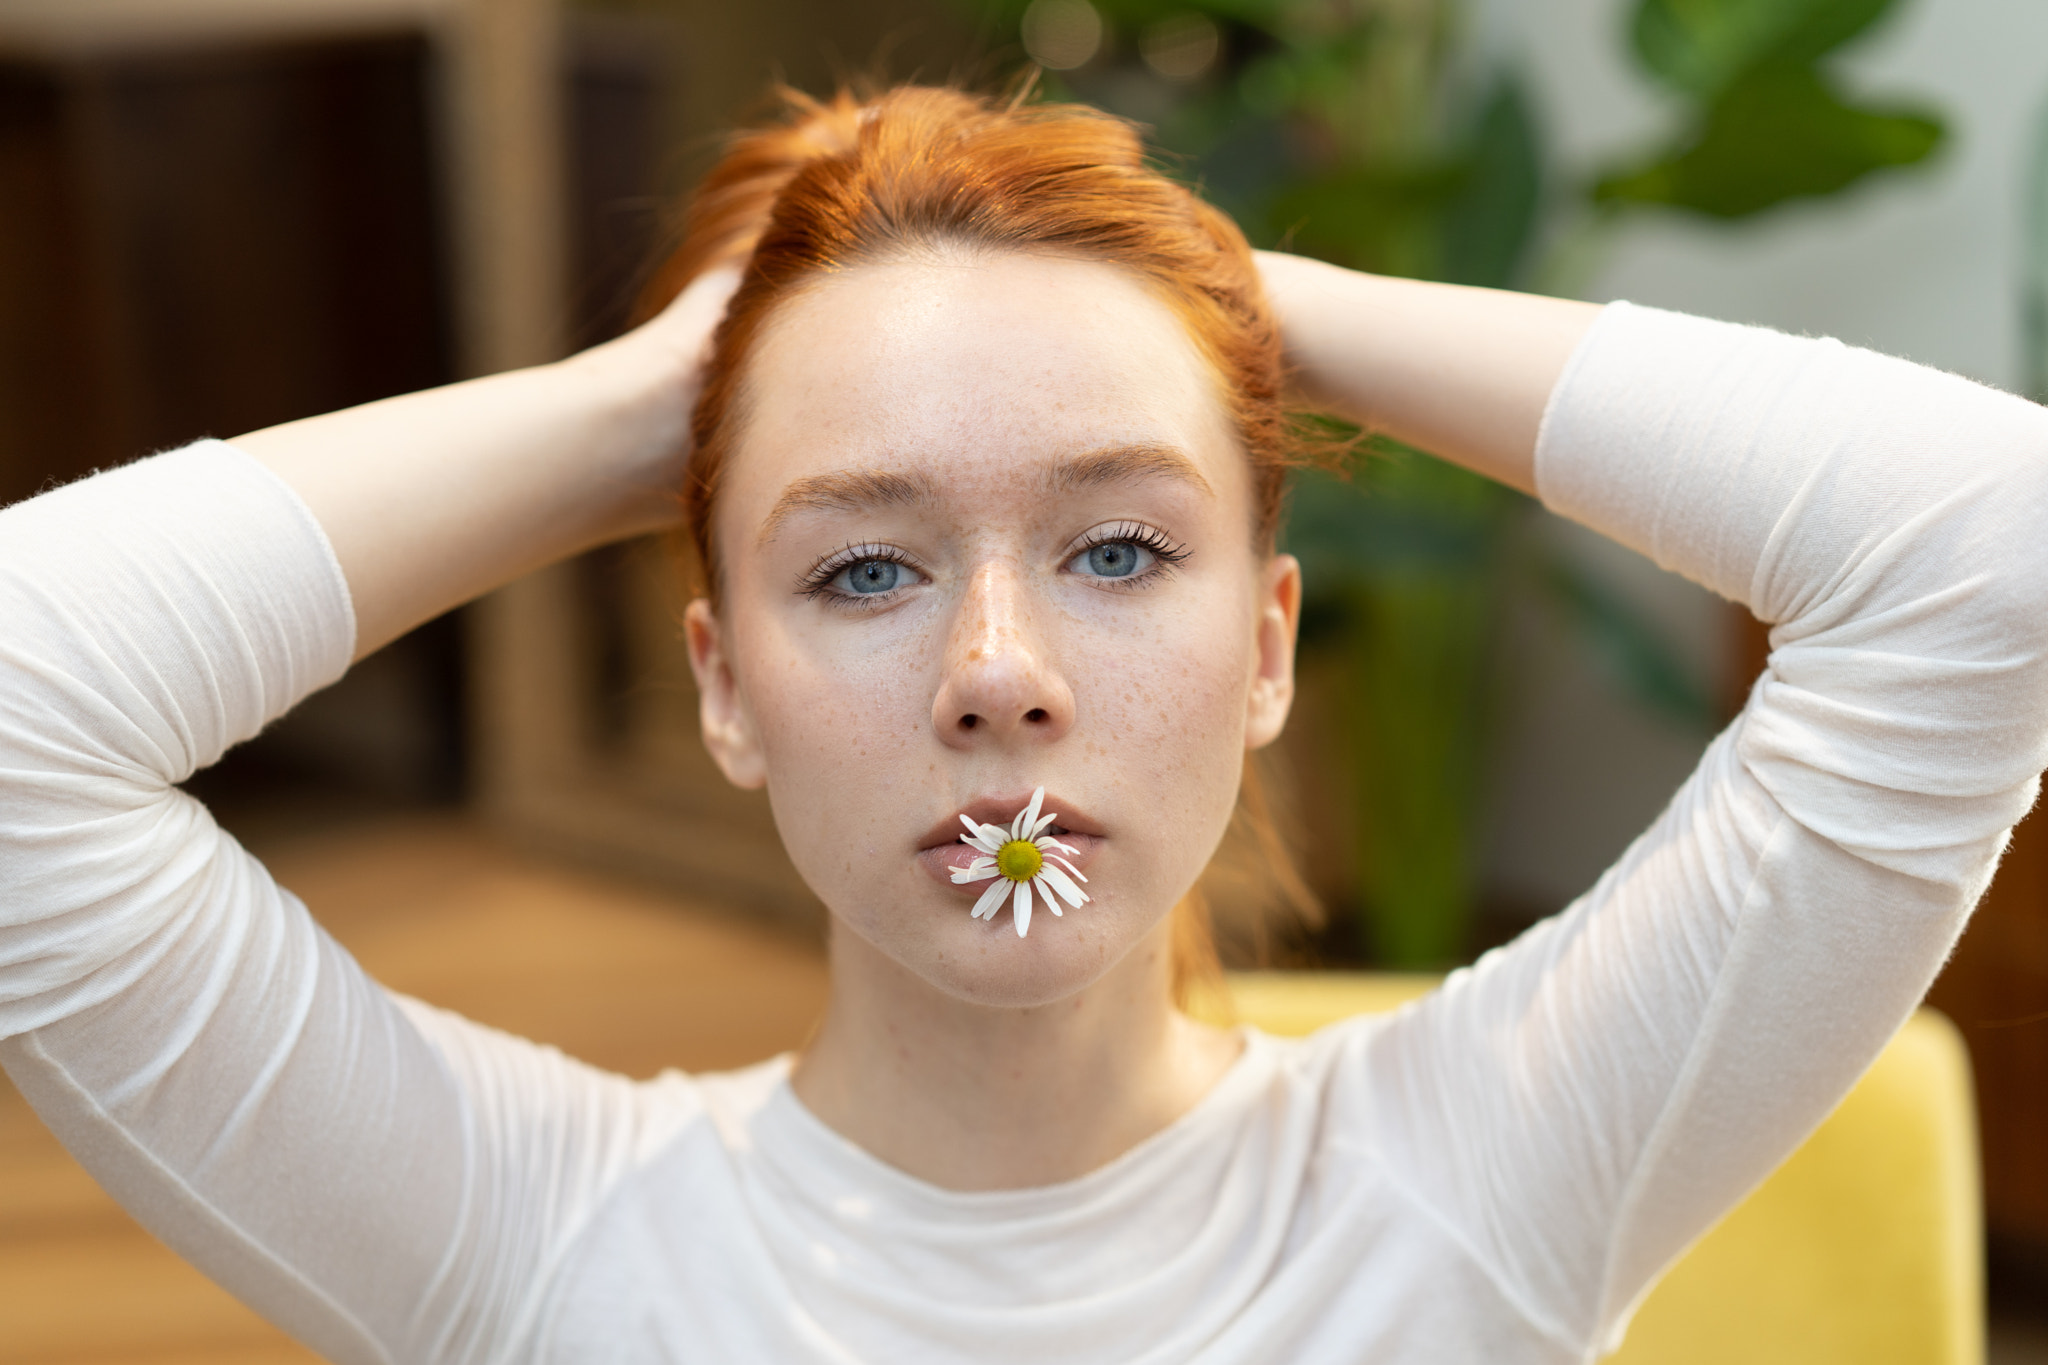 Igor Yakushkov Women Portrait Redhead Flower In Mouth Closeup Hands In Hair Arms Up 2048x1365